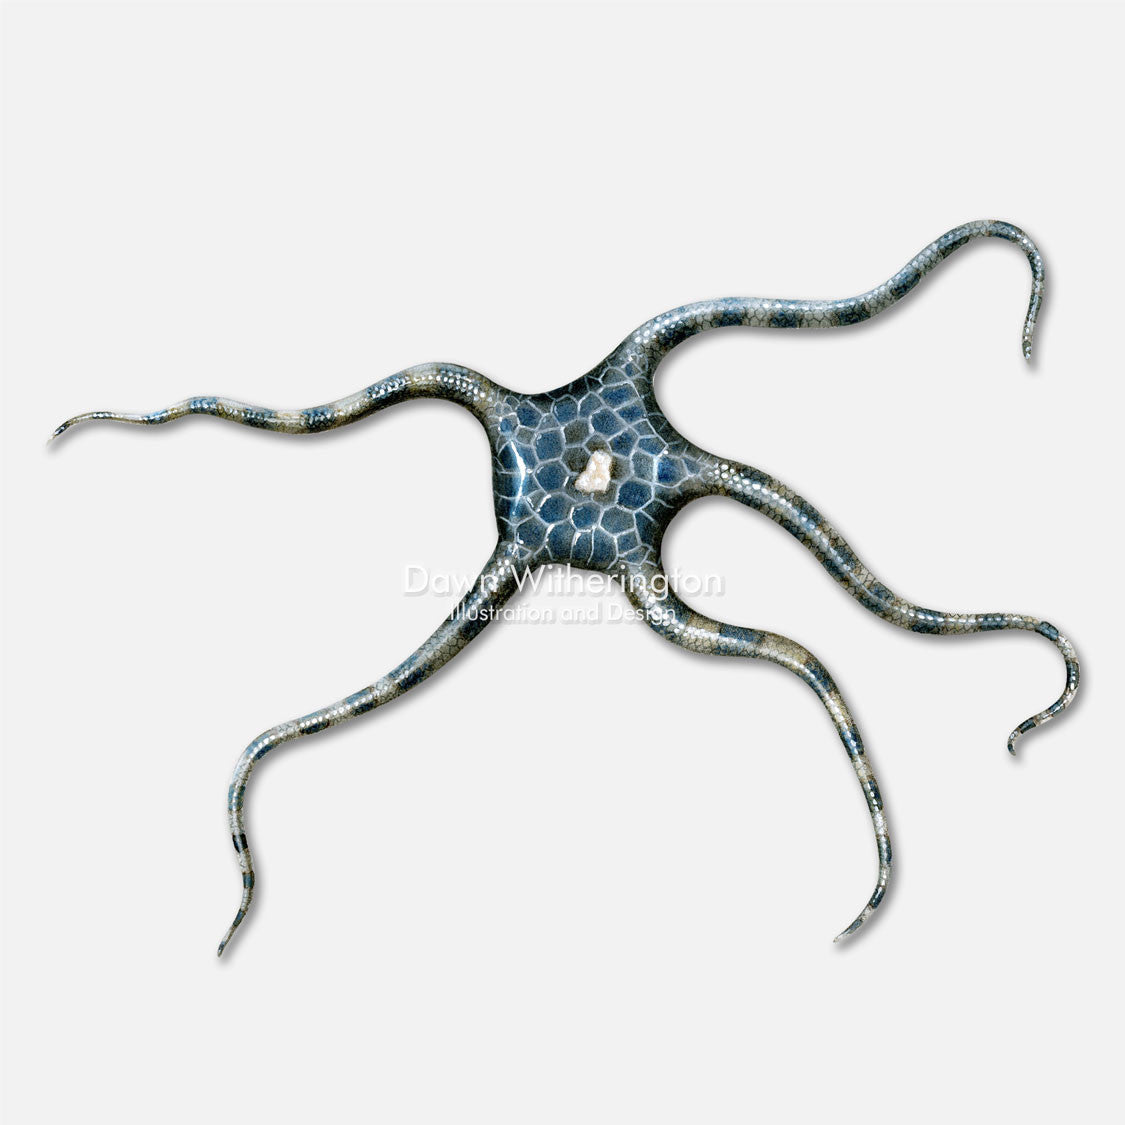 This beautiful illustration of a smooth brittle star, Ophioderma spp., is accurate in detail.